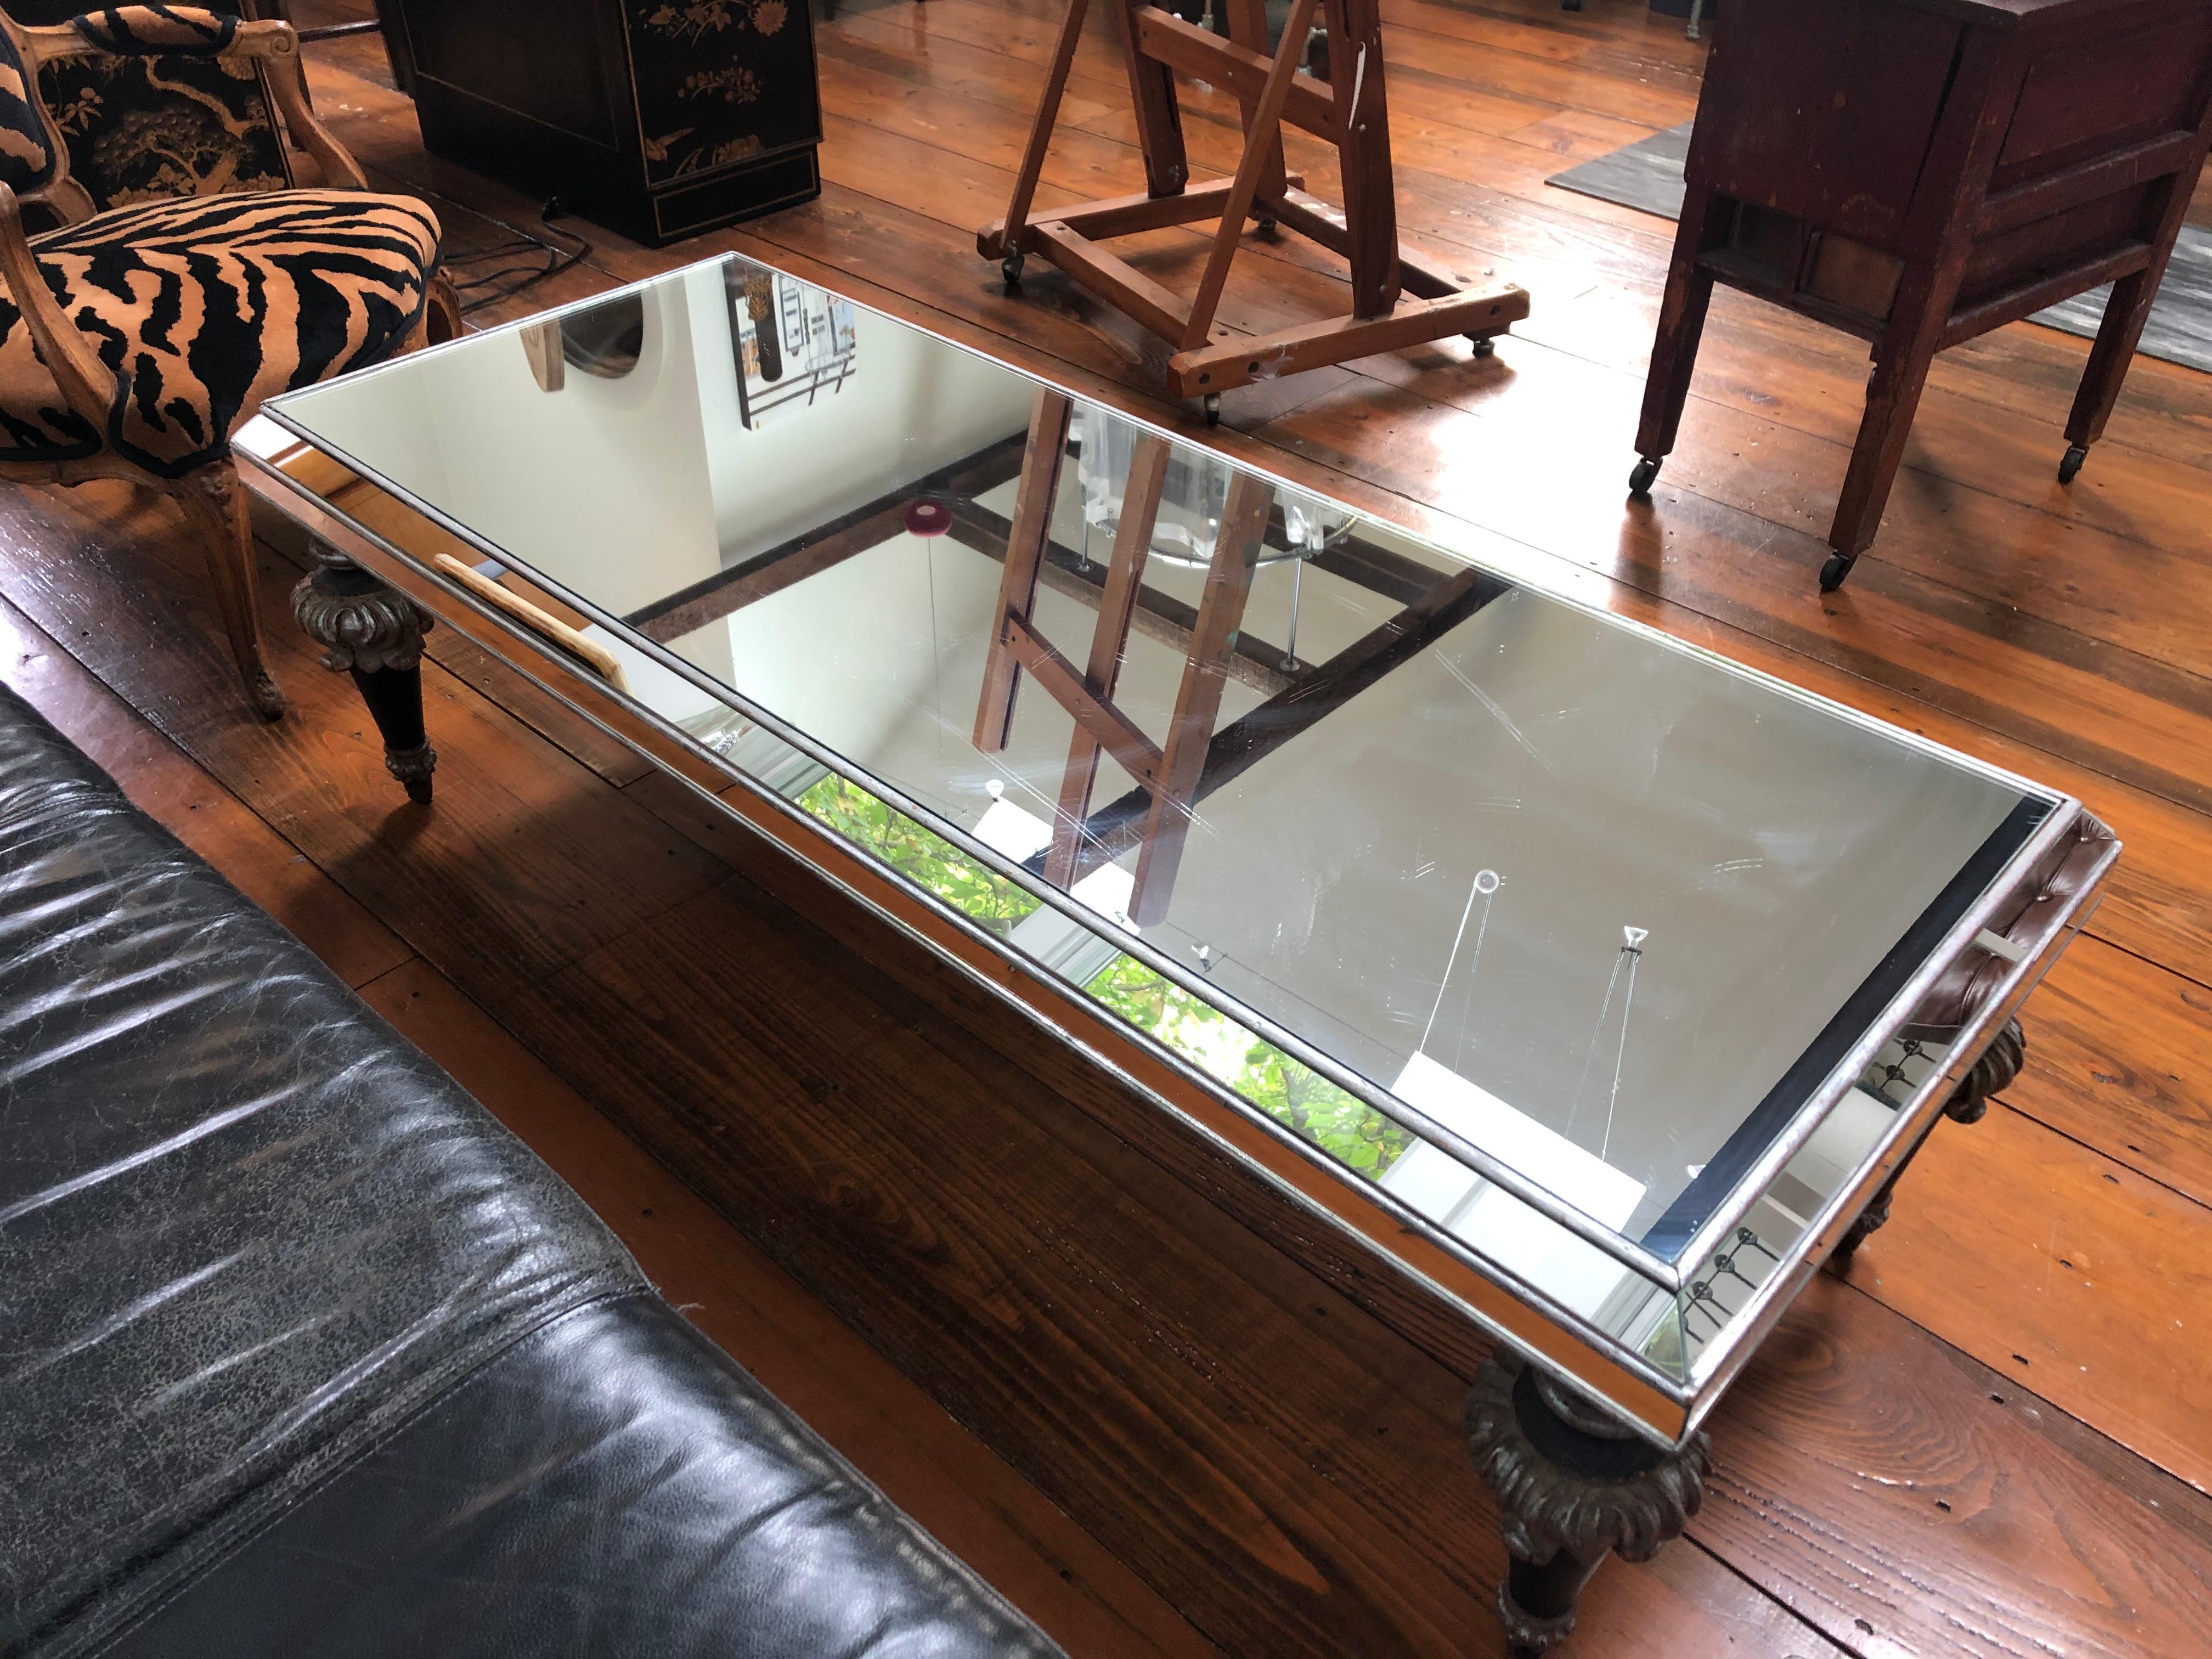 Mid-20th Century Glamorous Vintage Mirrored Coffeetable with Splendid Fancy Carved Wood Legs